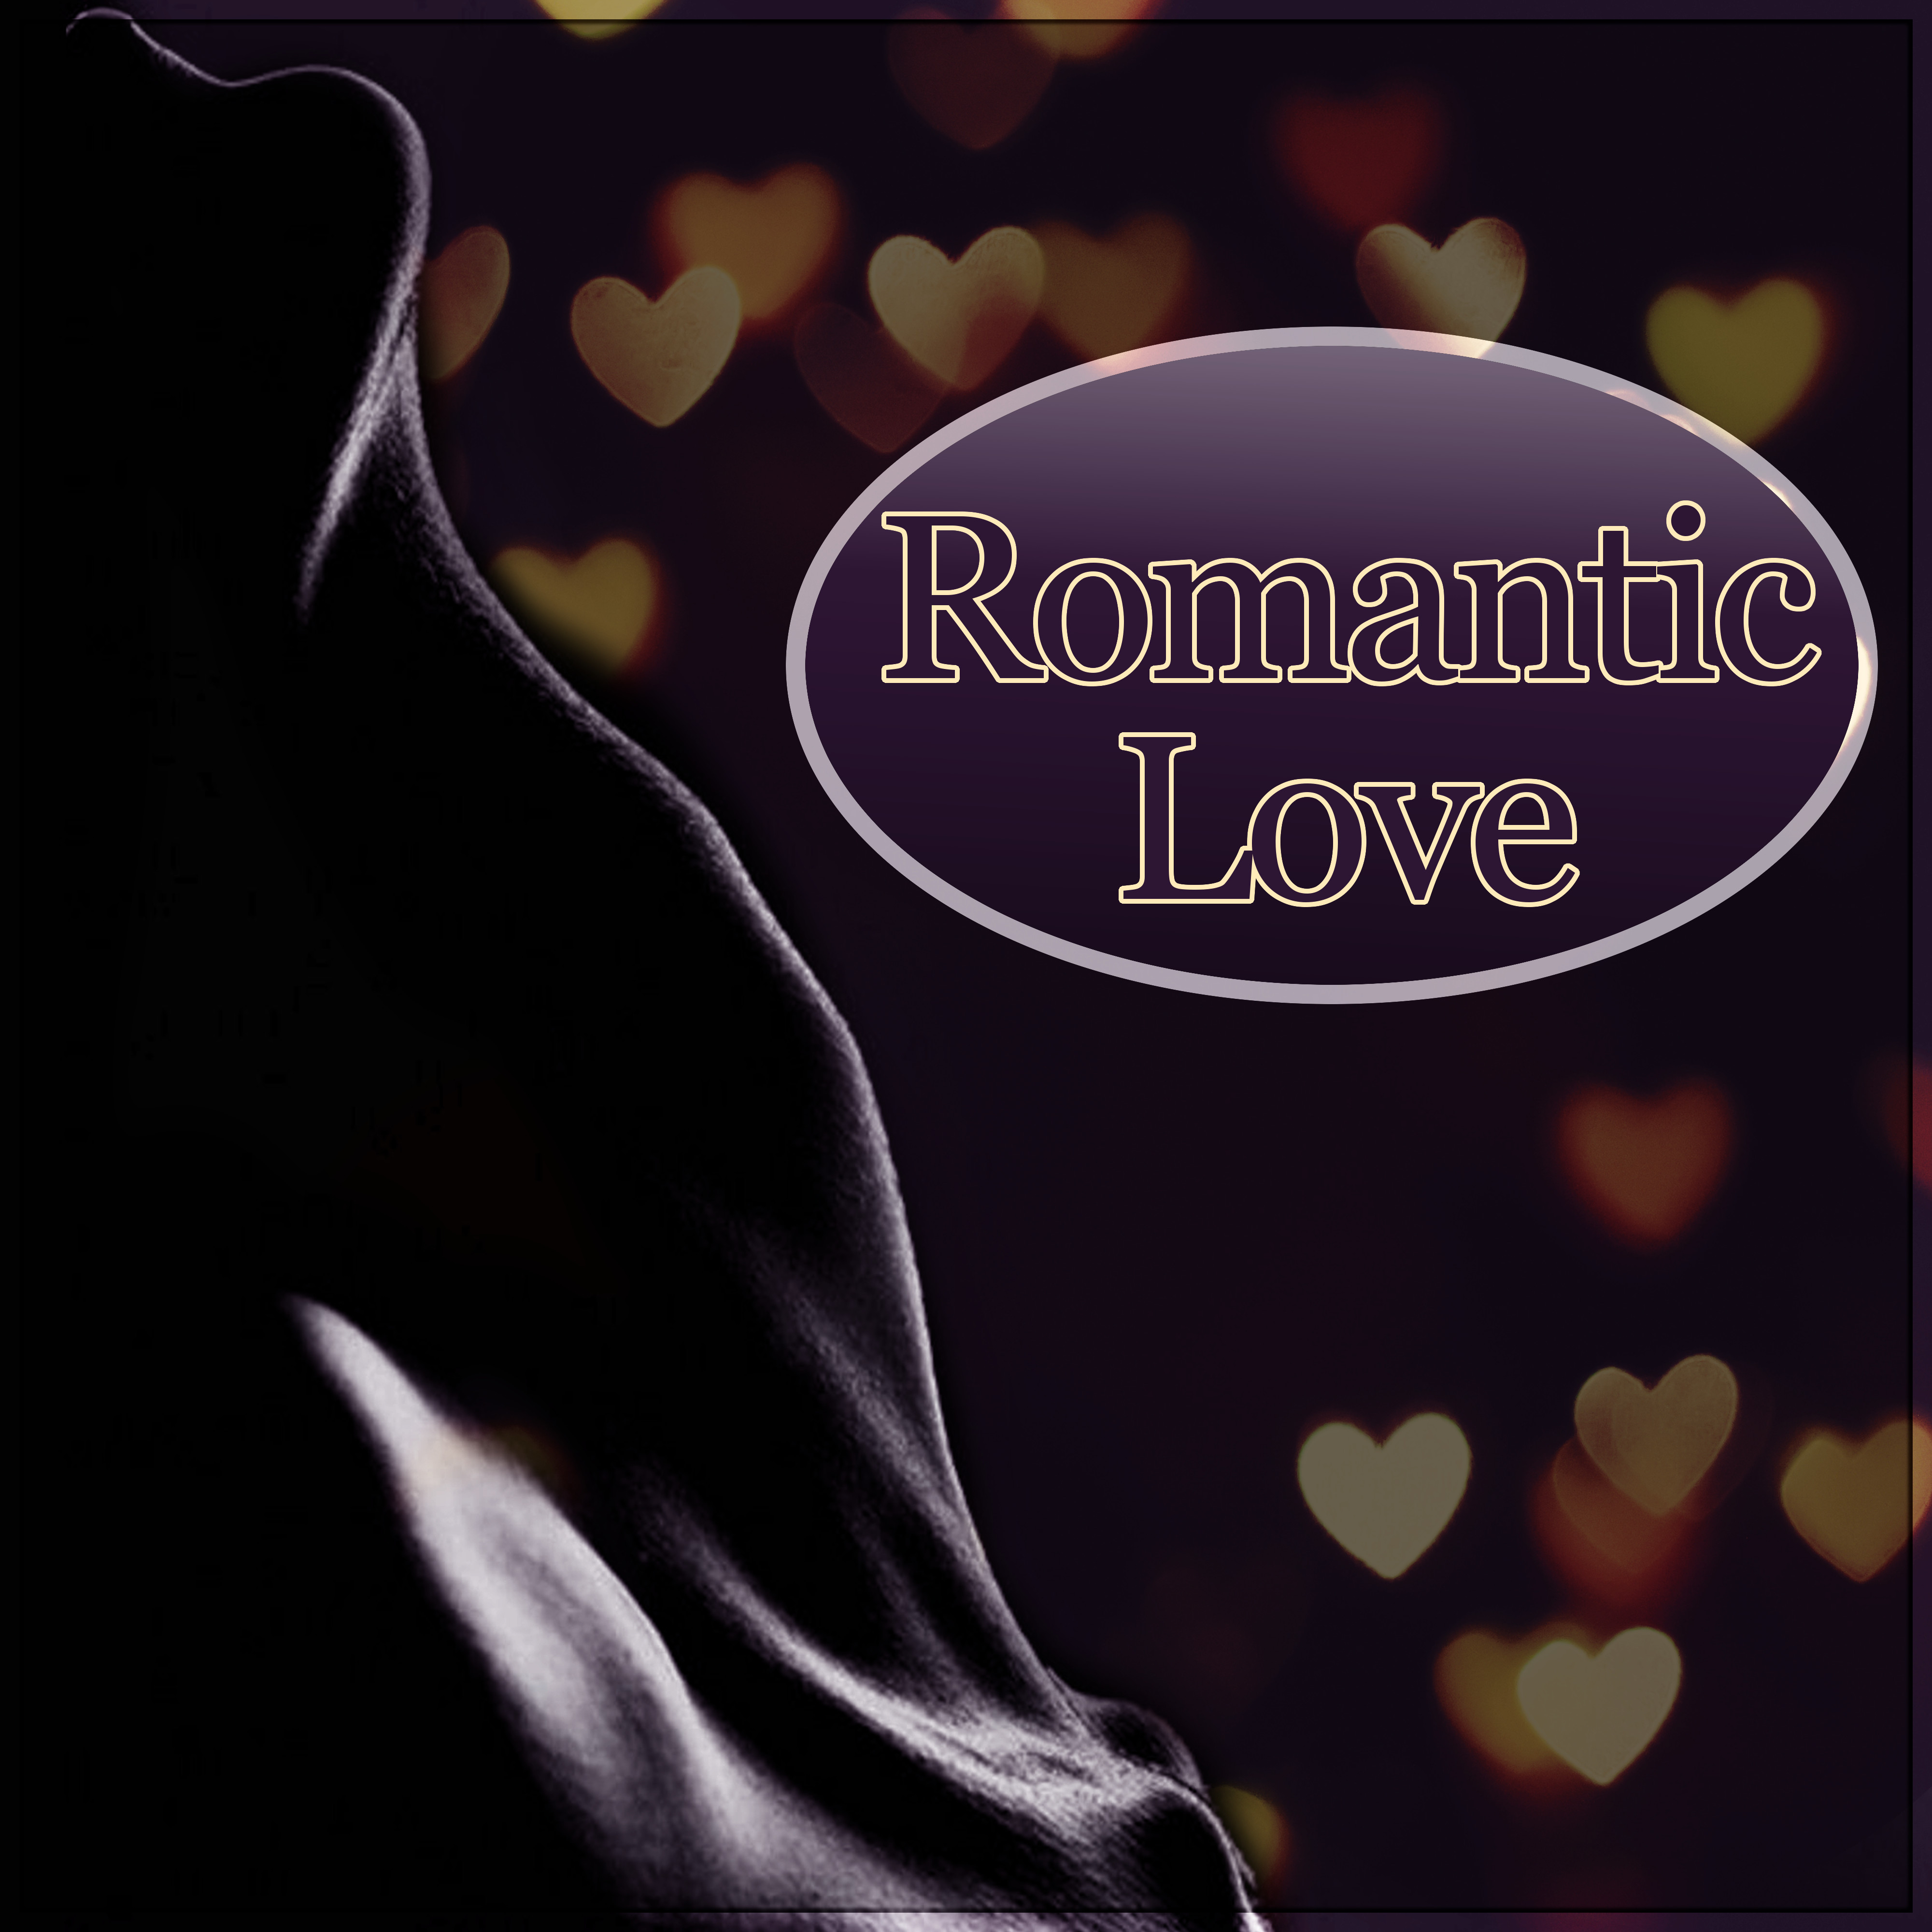 Romantic Love - Piano Music, Valentines Music, Candlelight Dinner for Two, Background Music, Jazz Piano Bar, Cocktail Part, Dinner Time